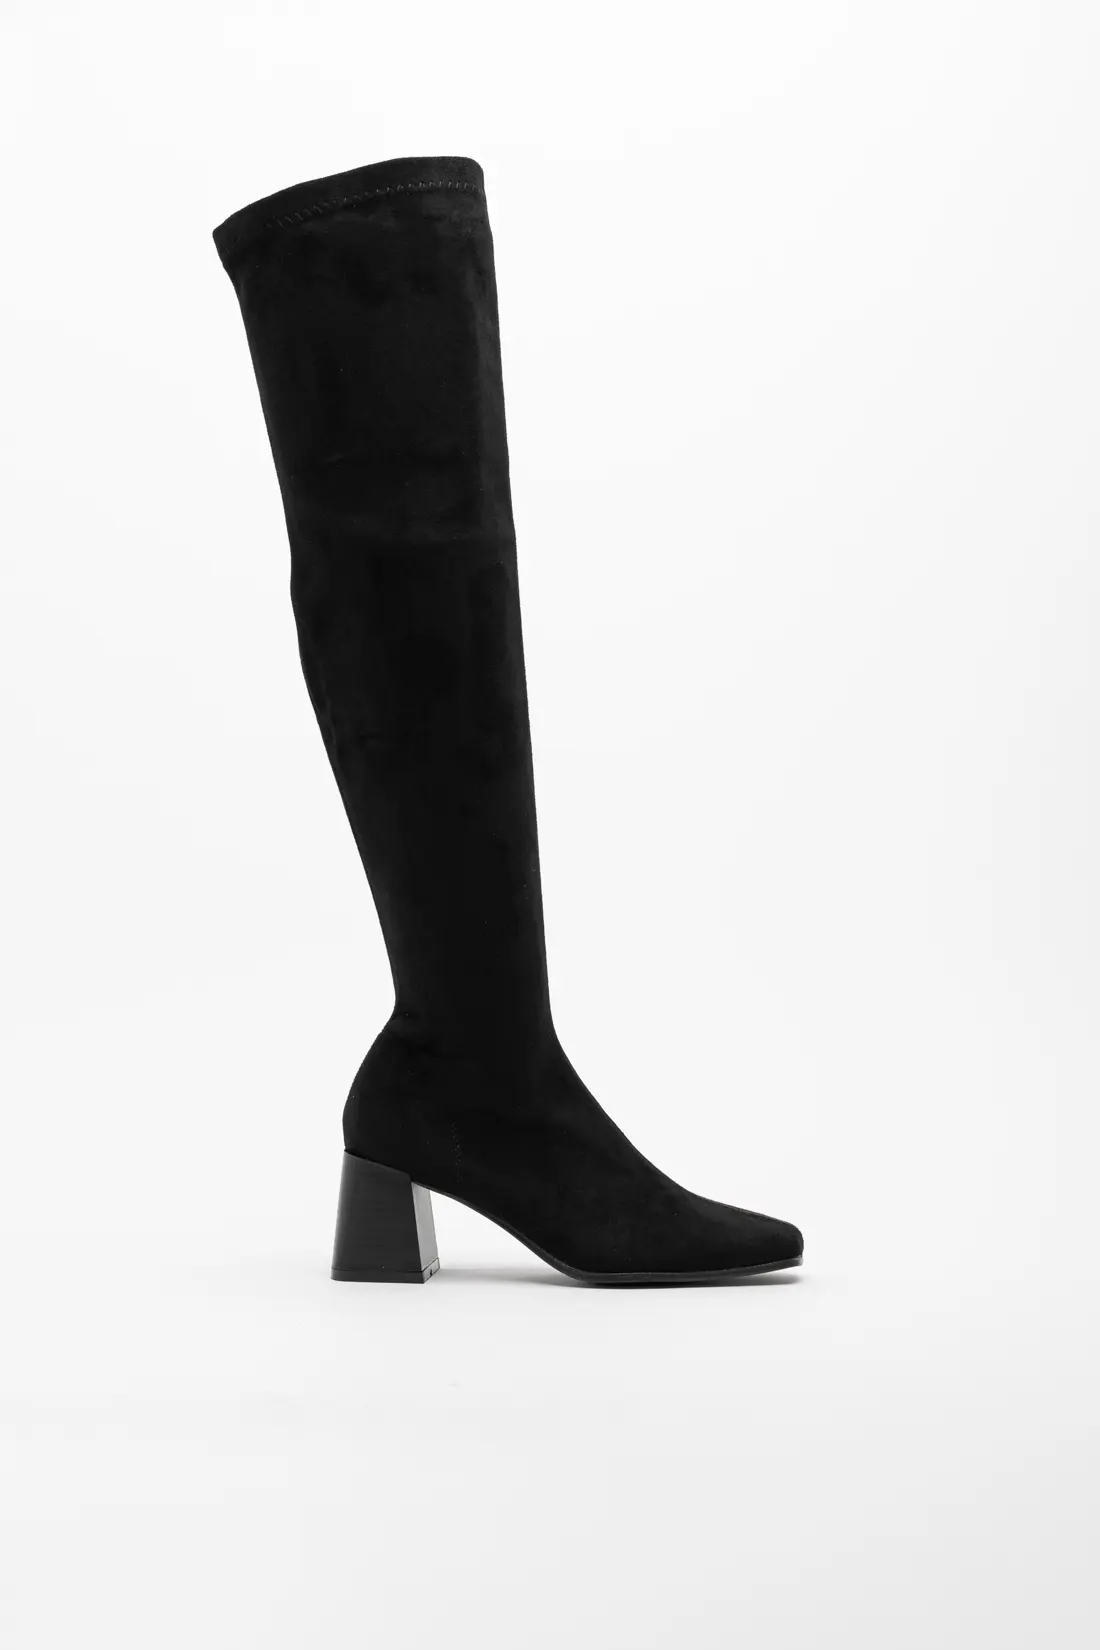 TALL DOLCHE BOOT - BLACK